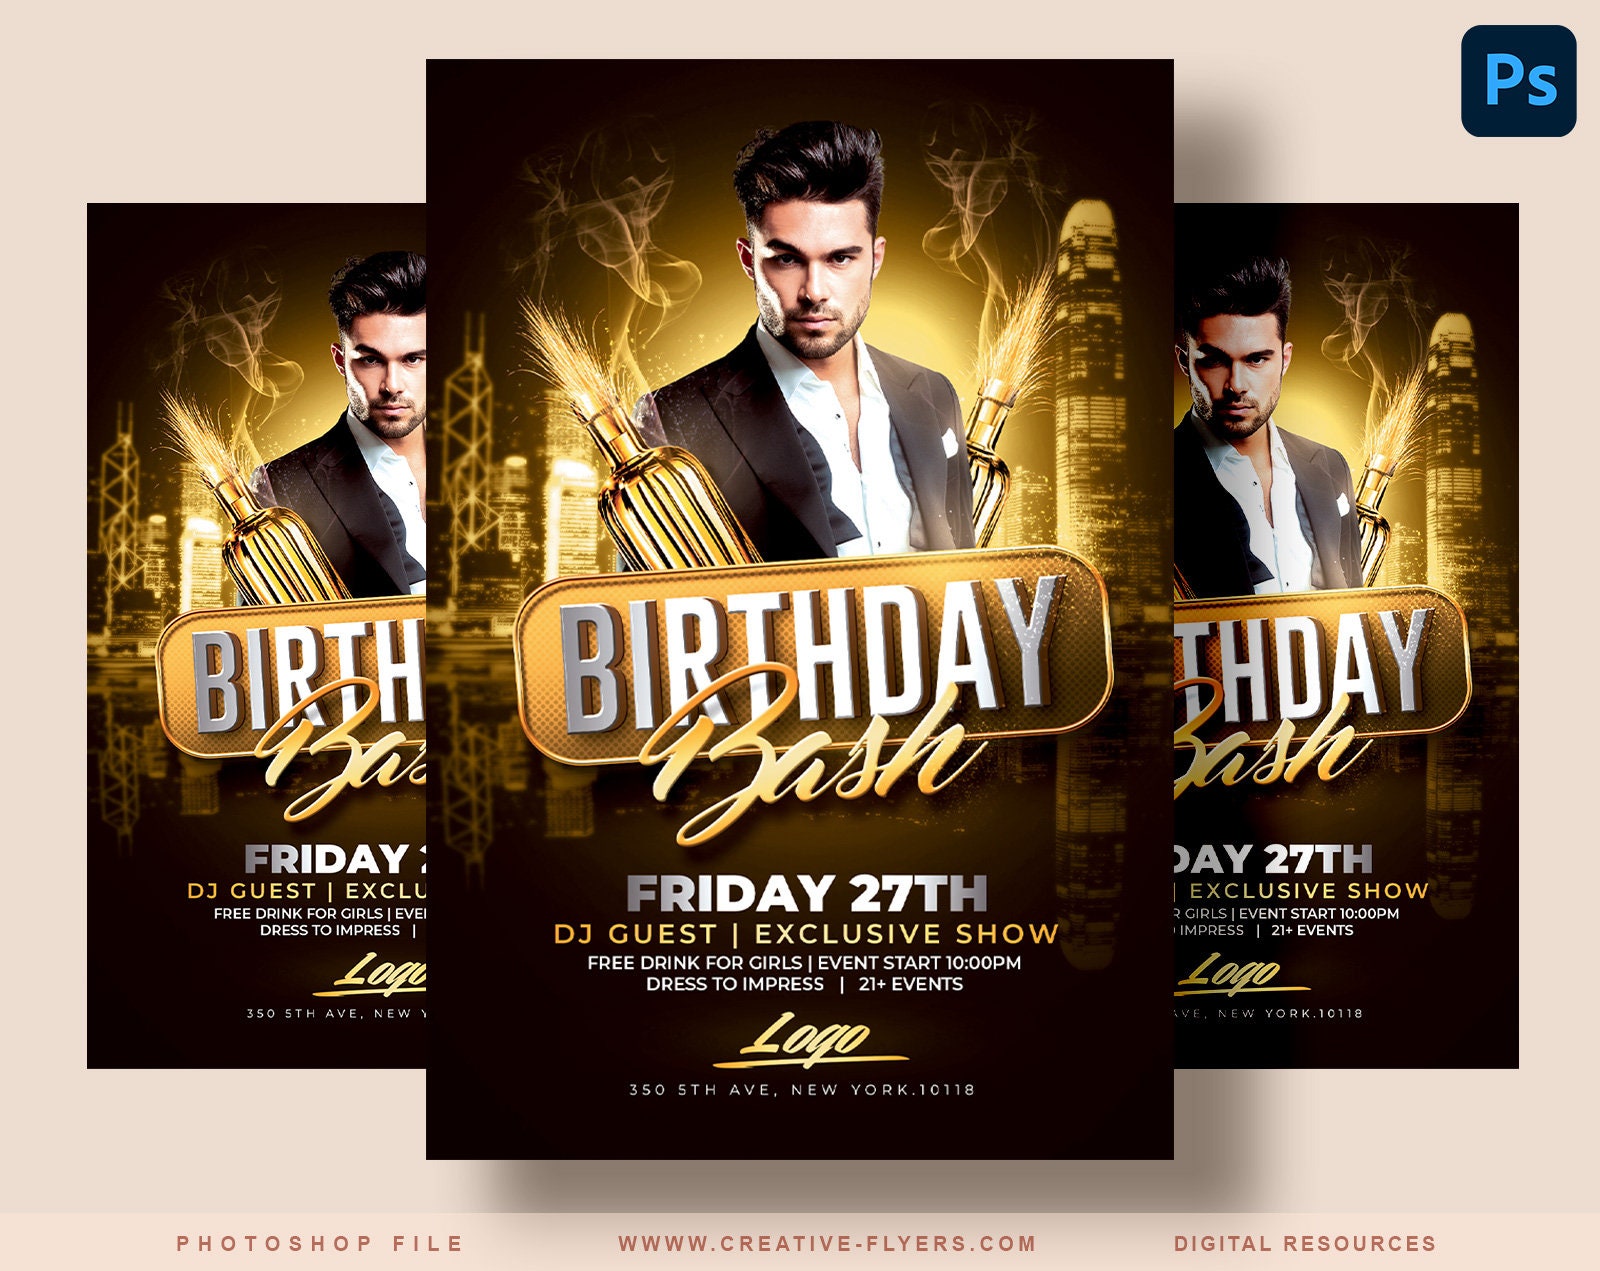 birthday-party-flyer-photoshop-psd-instant-download-etsy